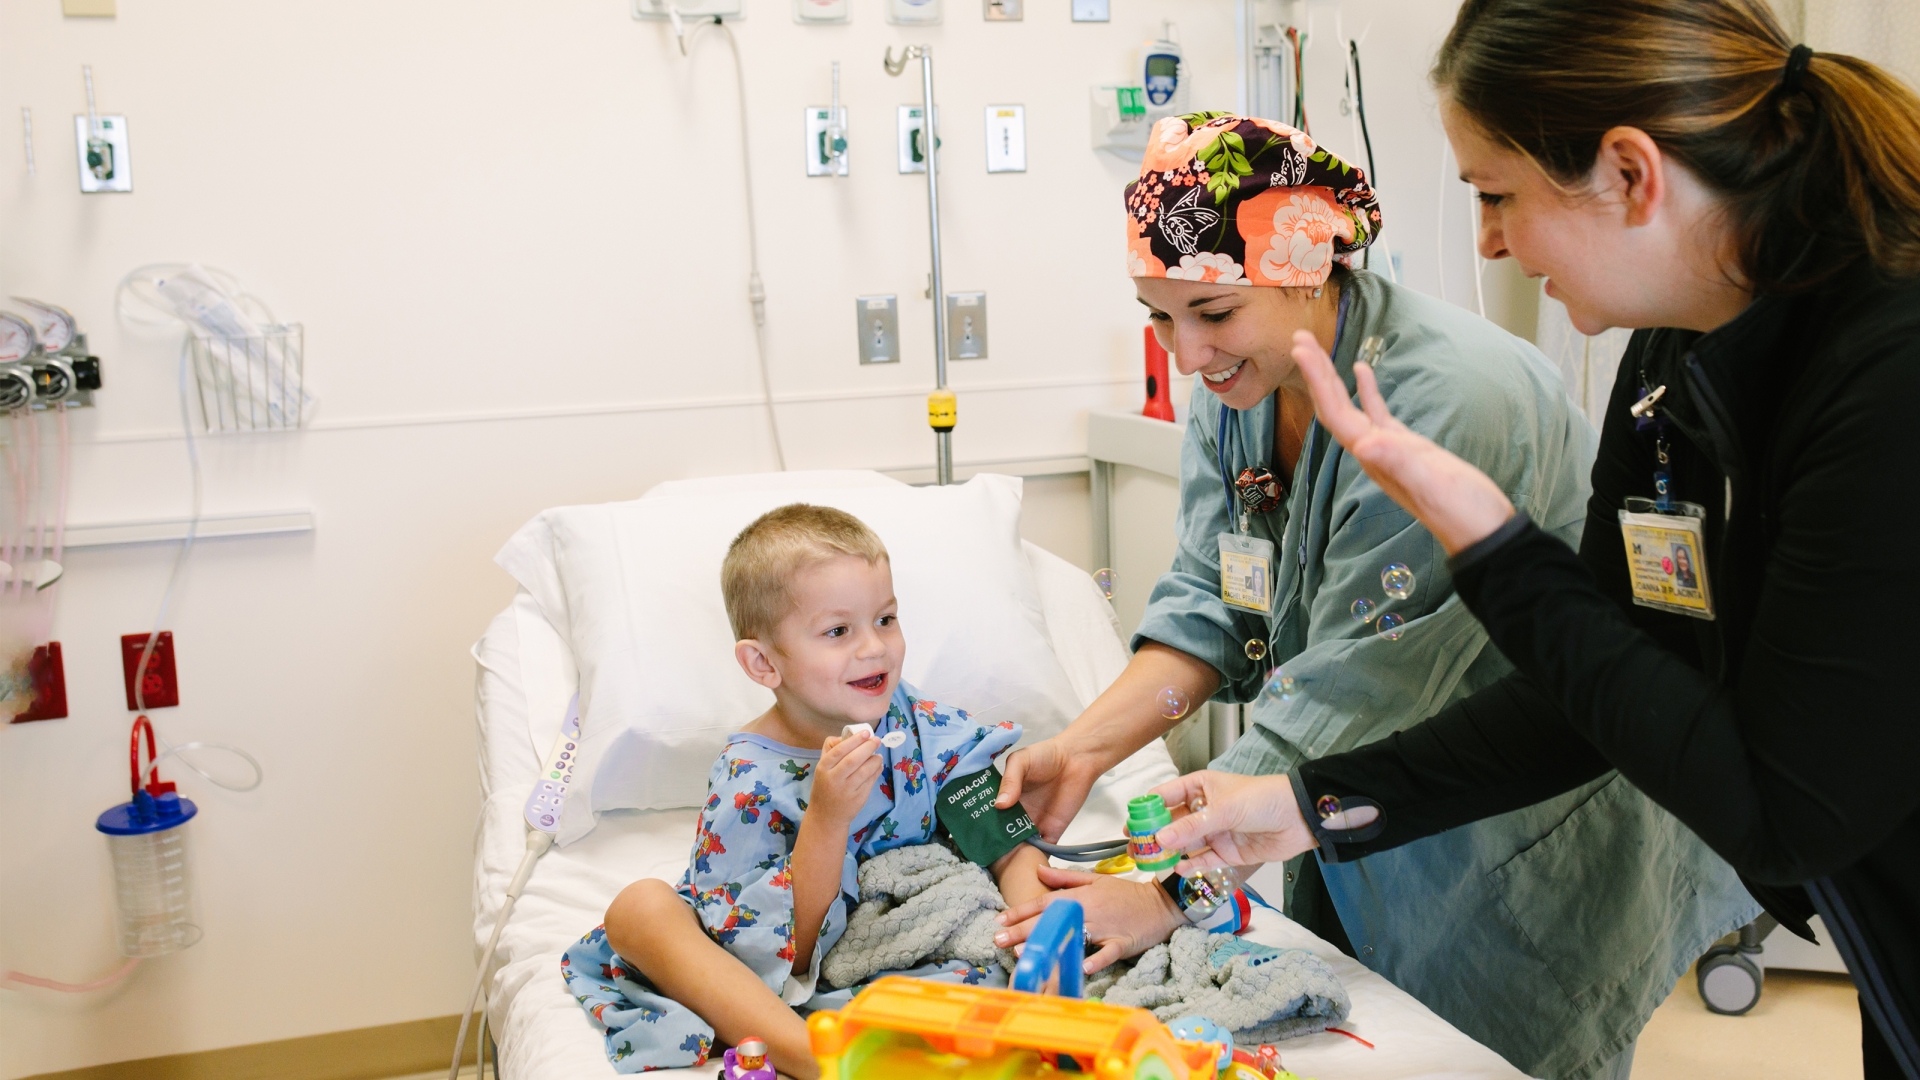 Little boy wearing children's hospital gown in hospital bed with toys and two female medical professionals engaging with him